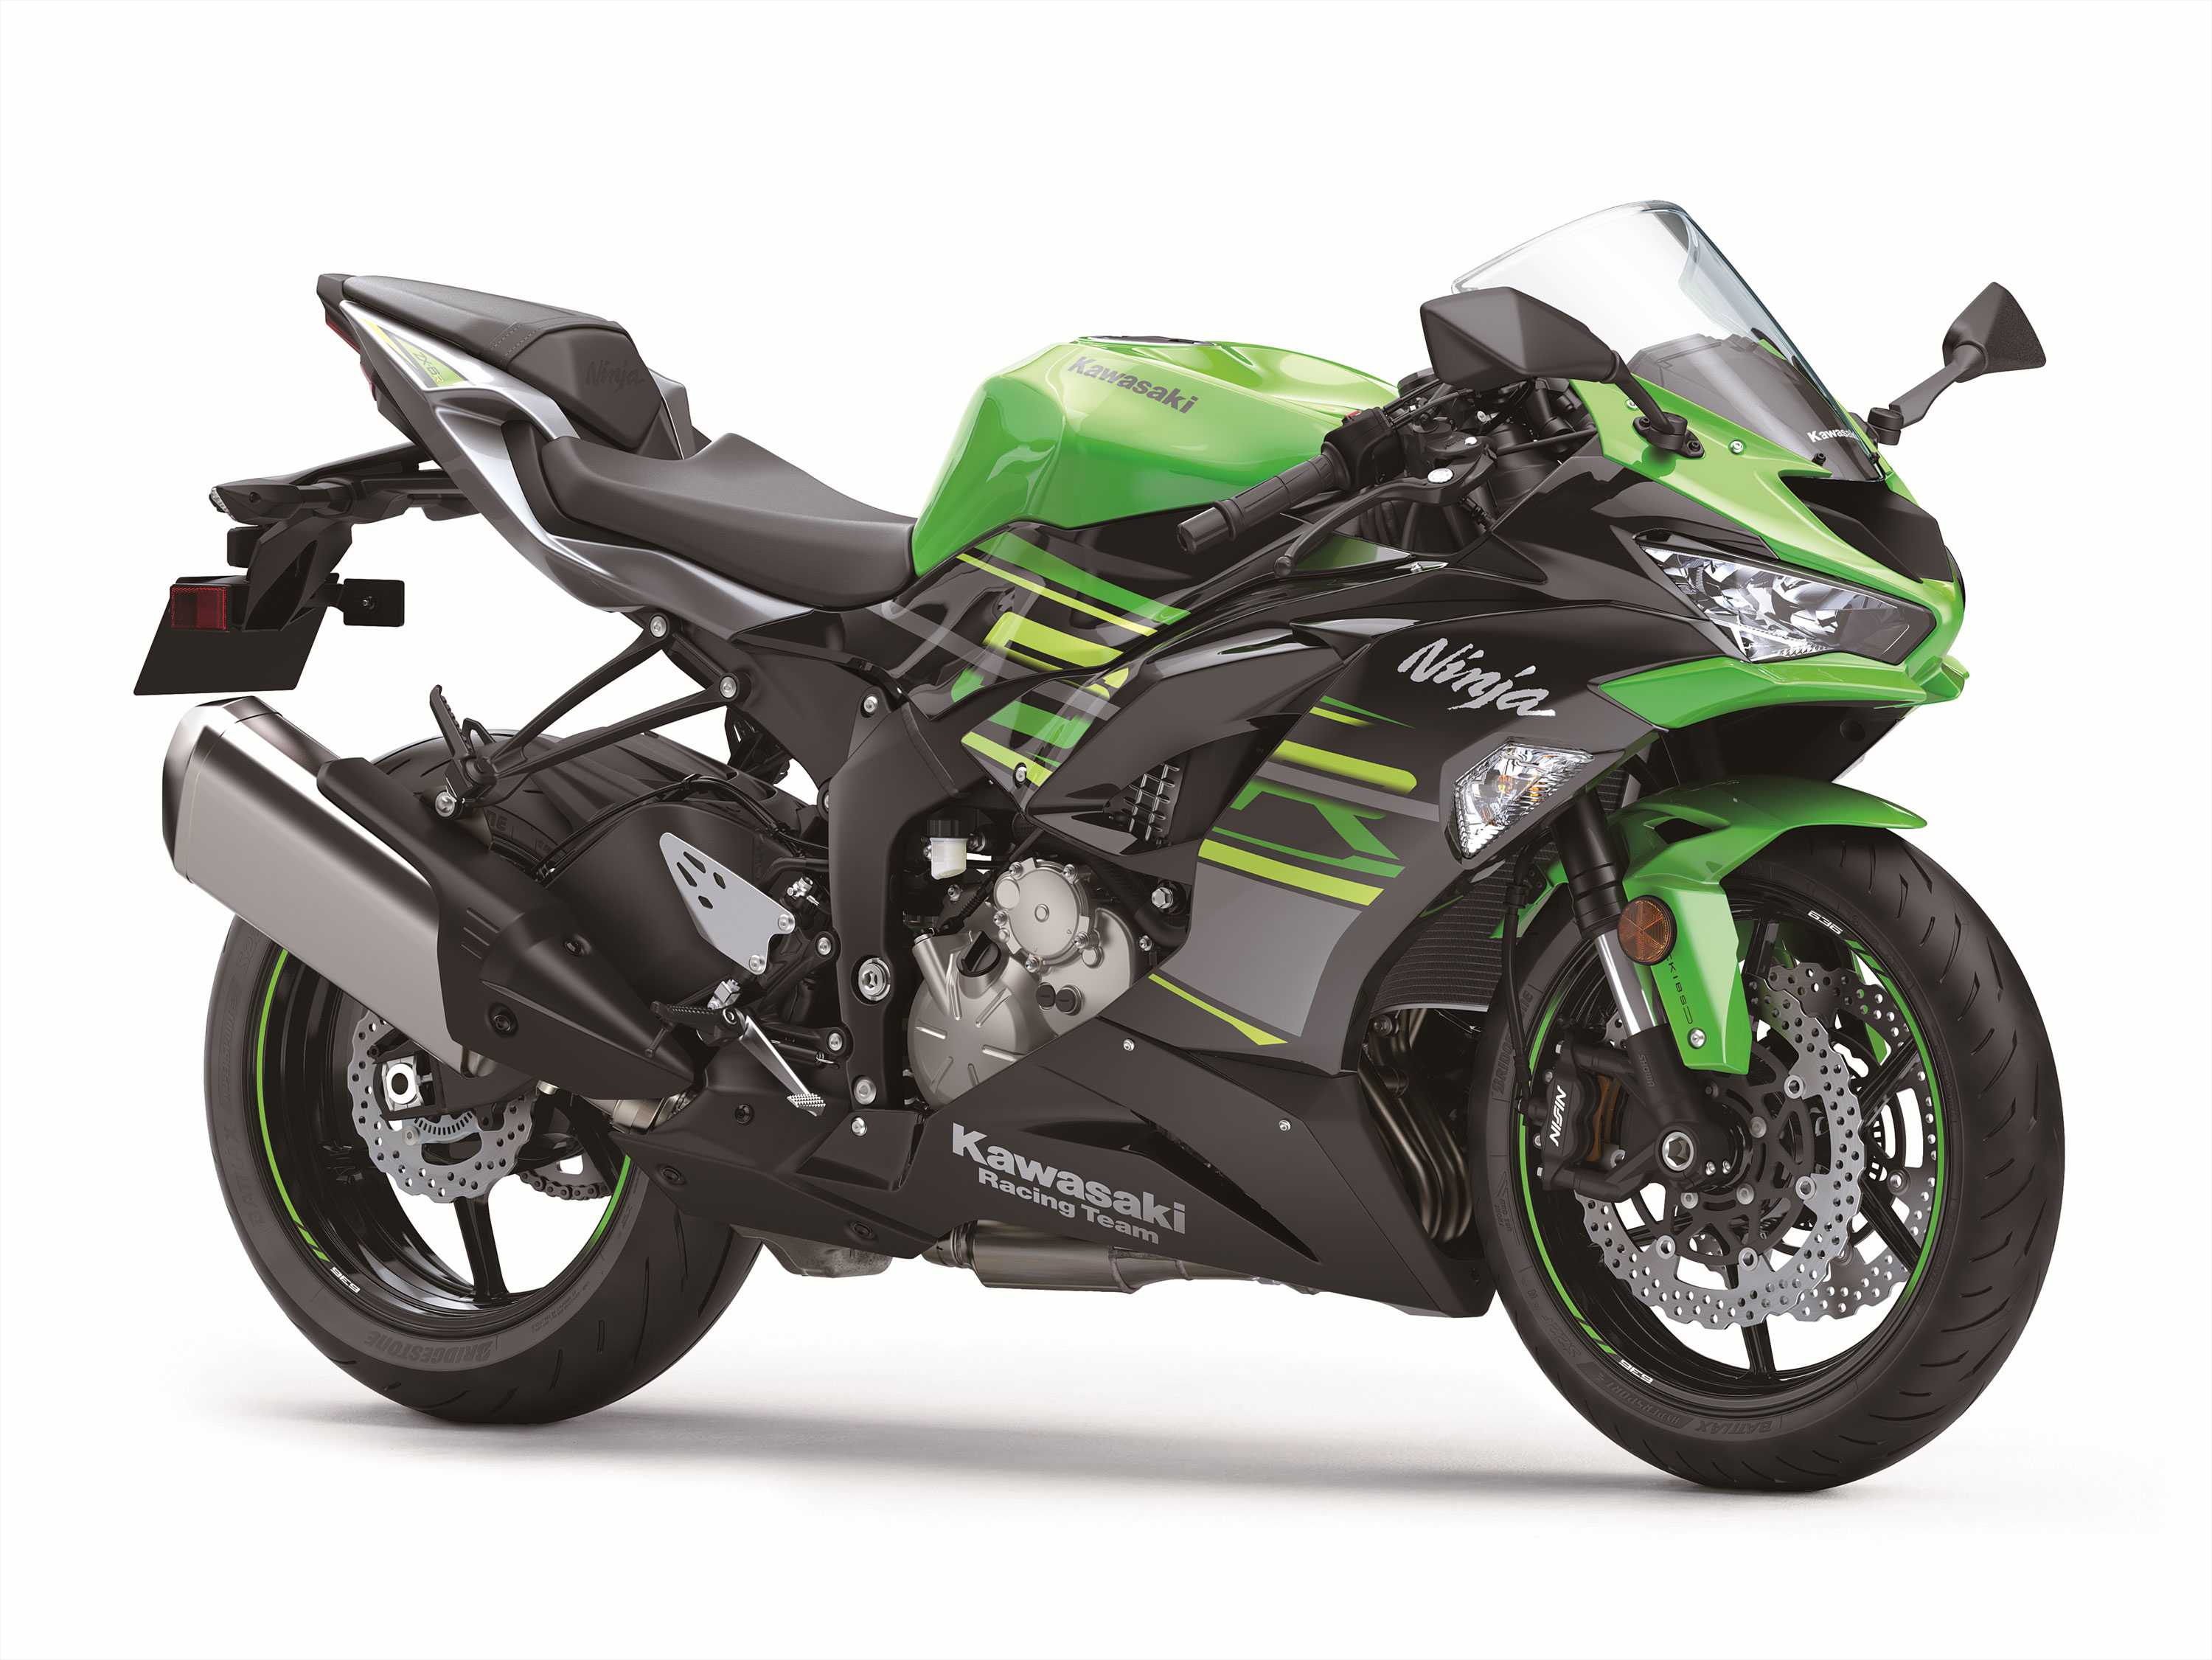 A $9,999 Supersport Kawasaki Introduces New 2019 ZX-6R With Host Of New Features And Lower Price! - Roadracing World Magazine | Motorcycle Riding, Racing Tech News